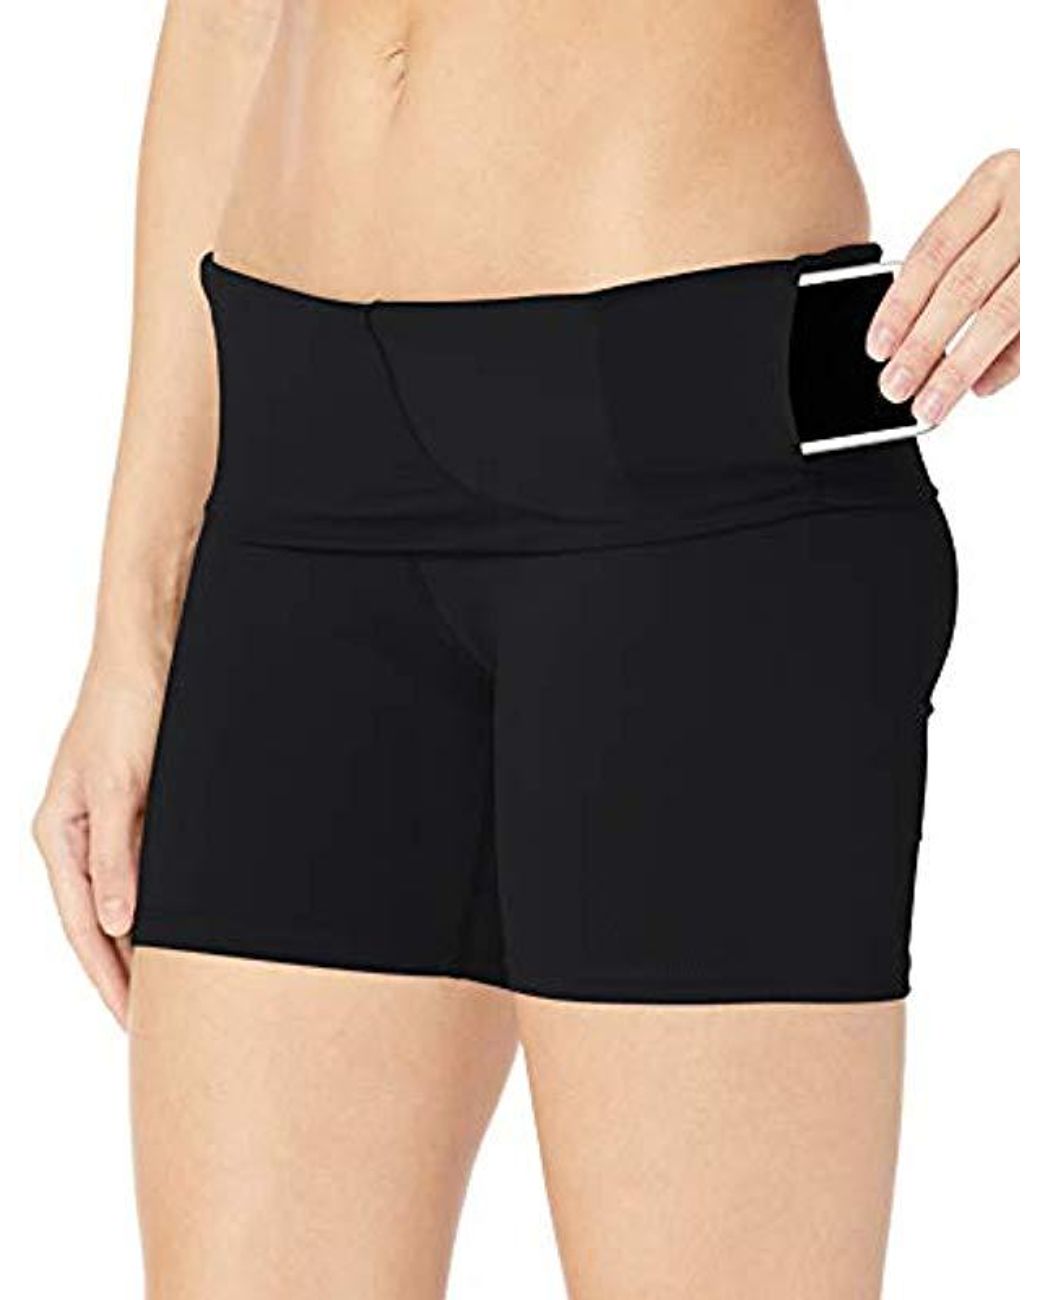 Core 10 Womens Knit Waistband Run Short with Built-in Compression Shorts